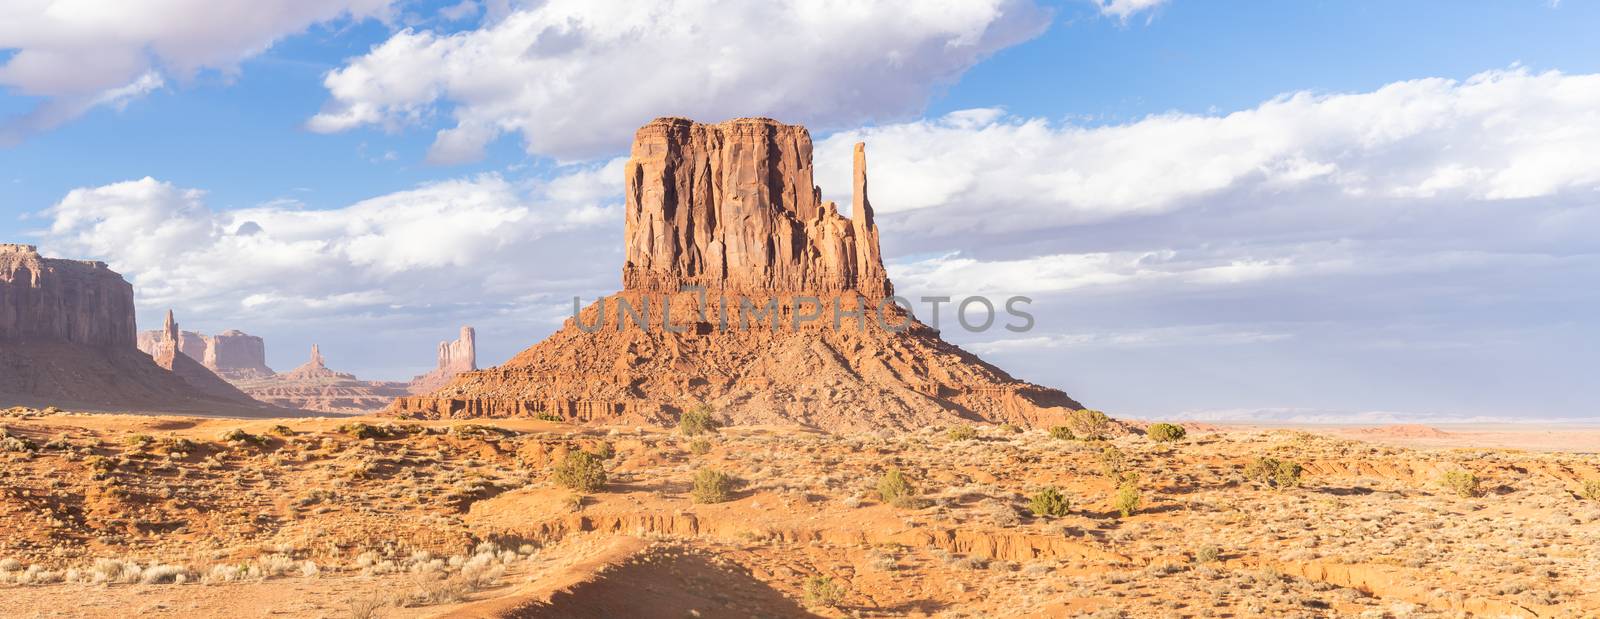 Monument Valley by vichie81